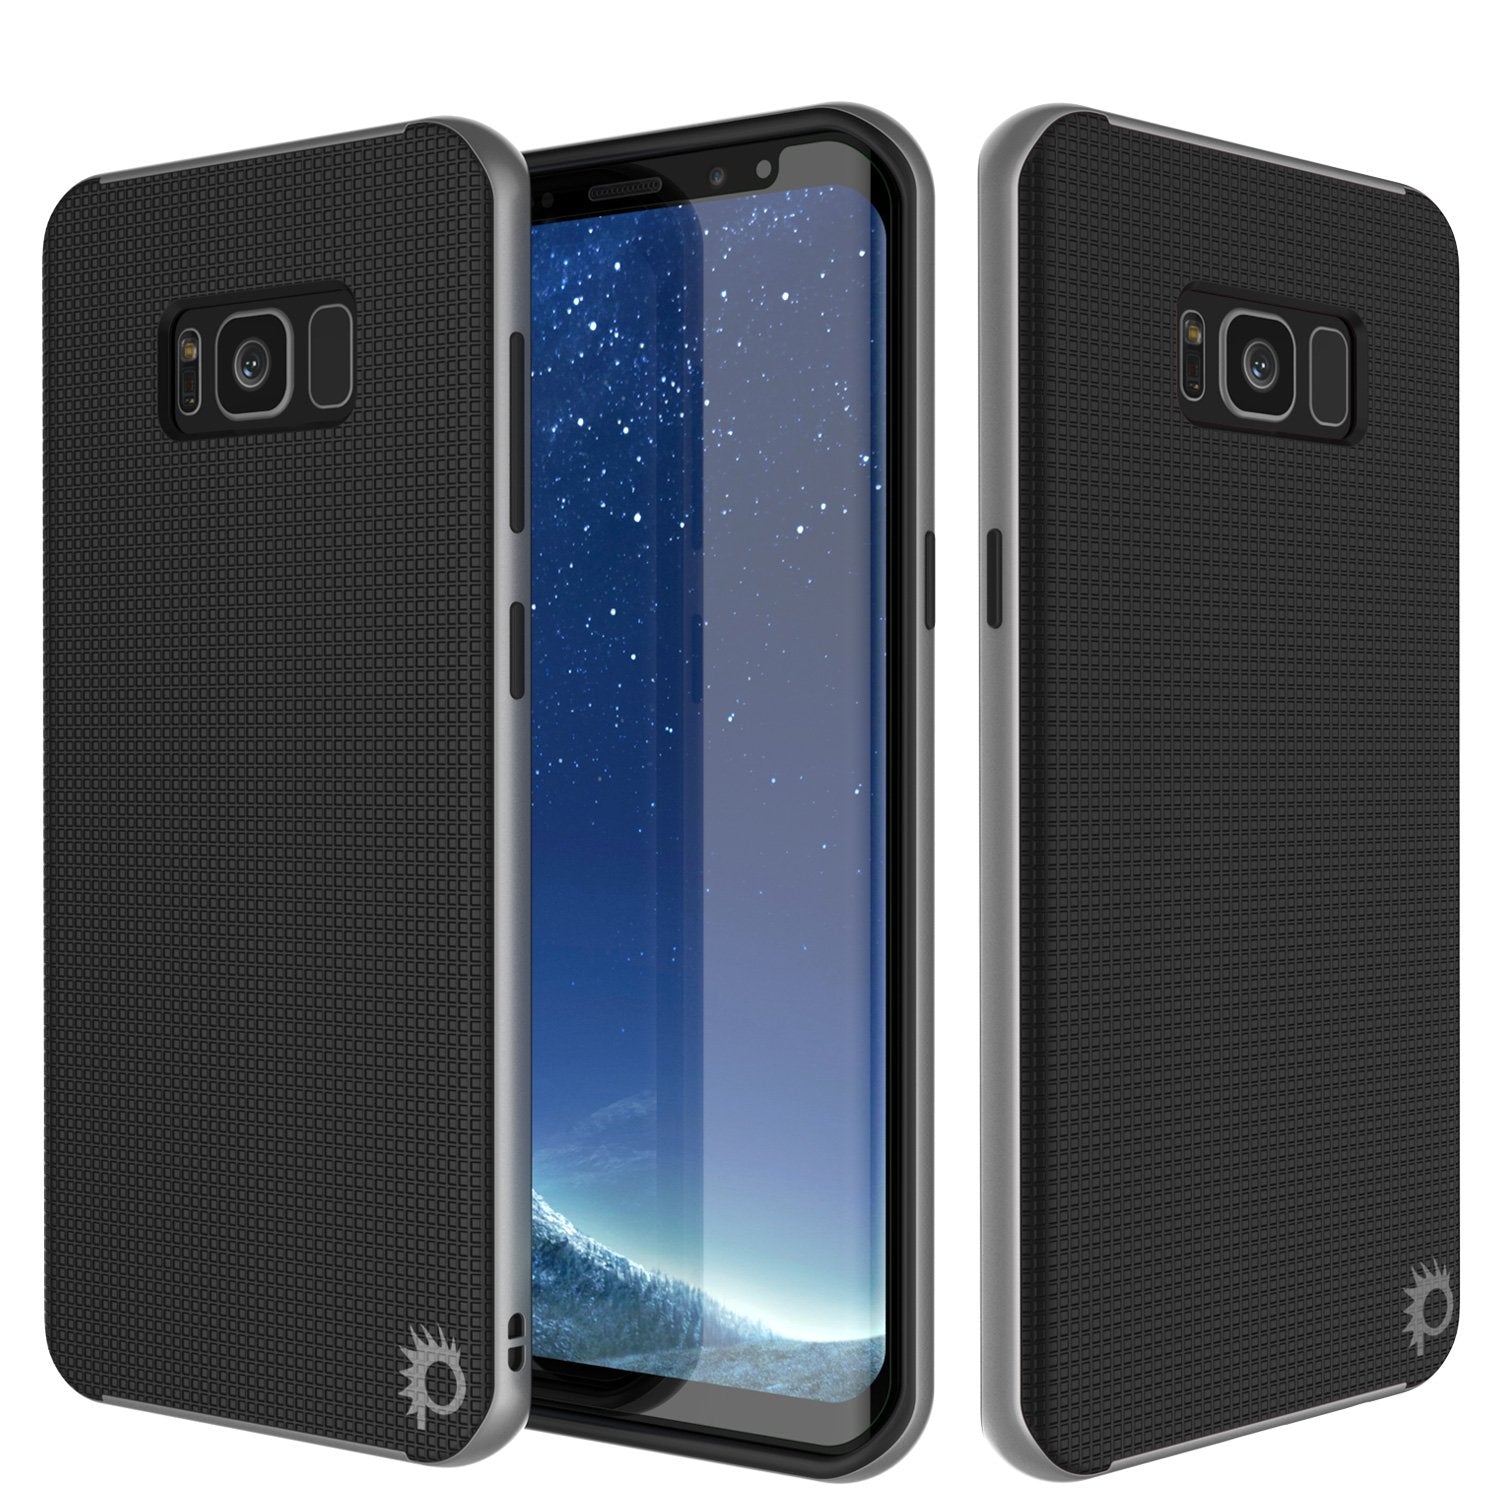 Galaxy S8 Case, PunkCase [Stealth Series] Hybrid 3-Piece Shockproof Dual Layer Cover [Non-Slip] [Soft TPU + PC Bumper] with PUNKSHIELD Screen Protector for Samsung S8 Edge [Silver]